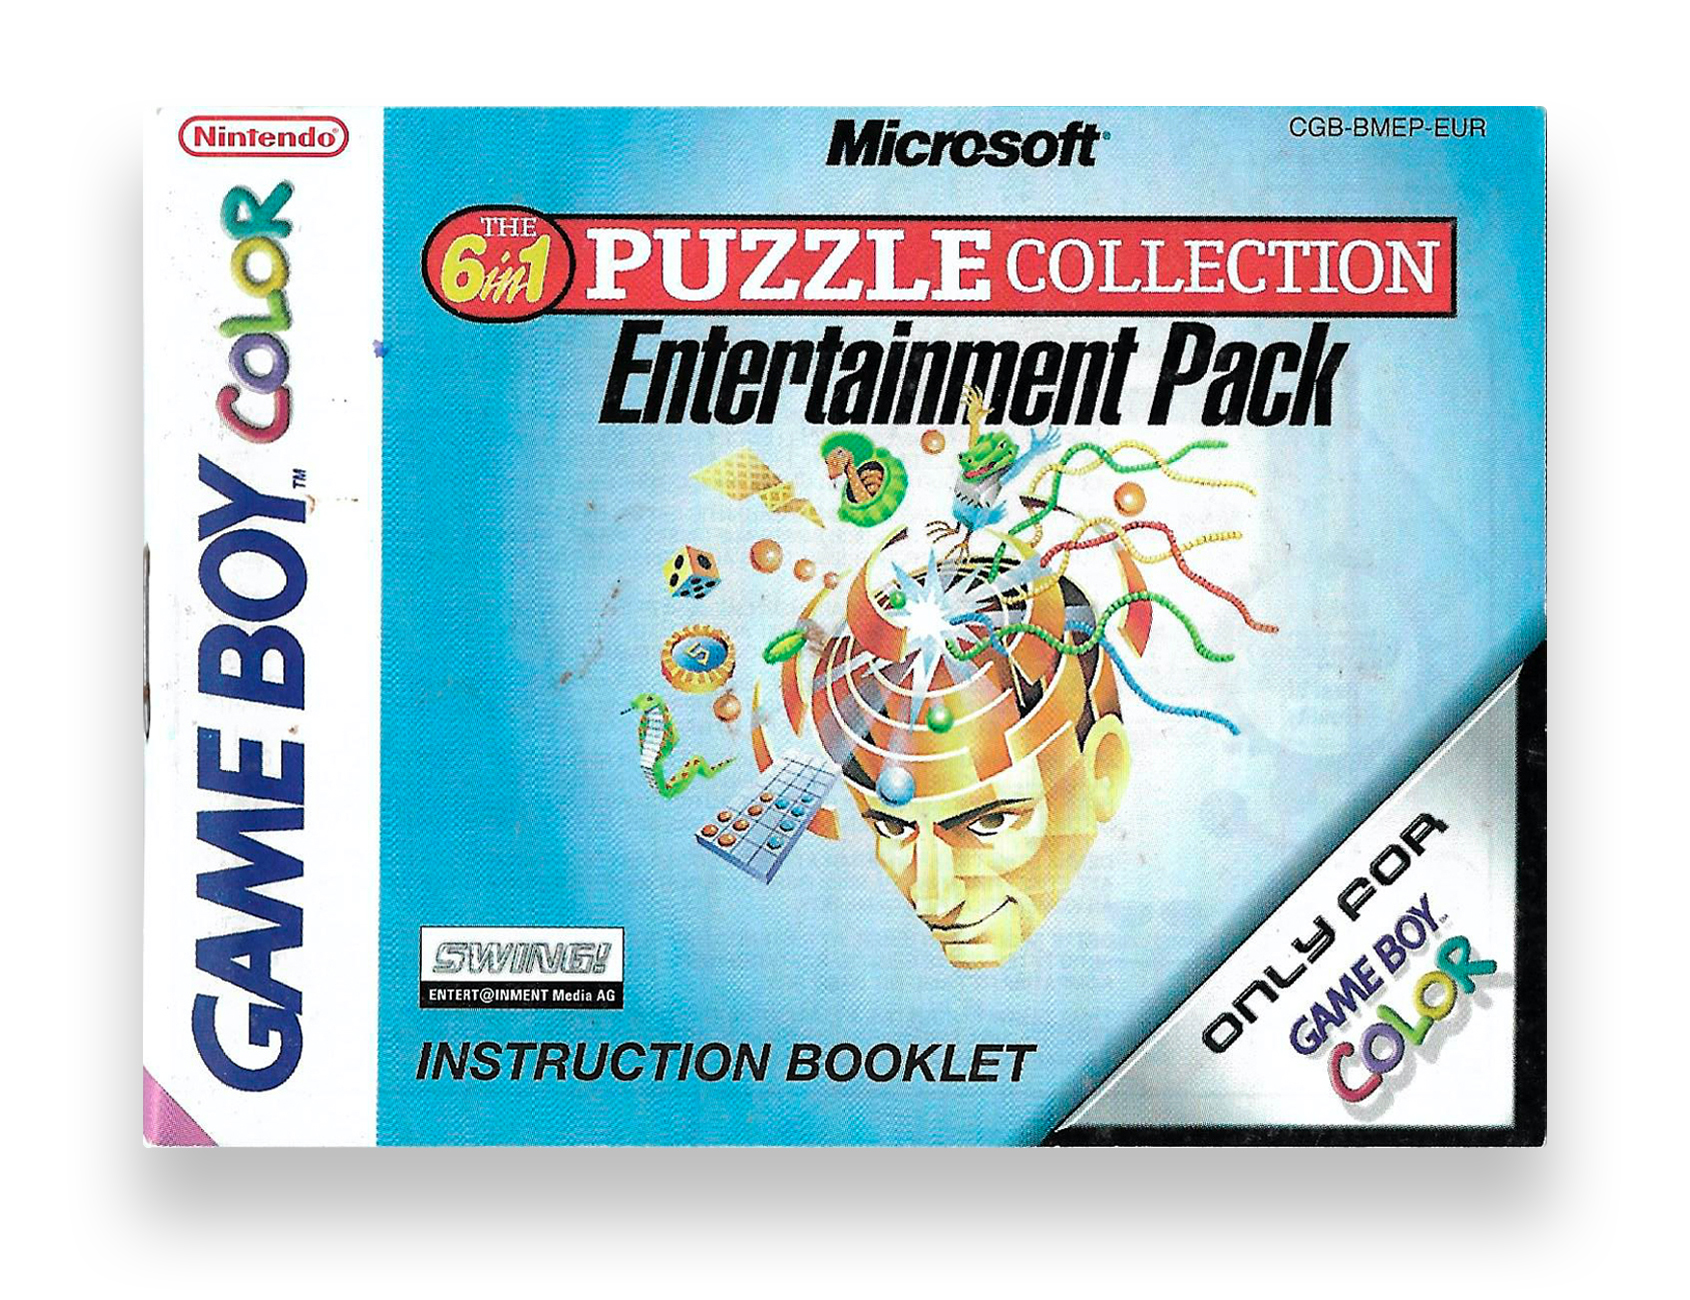 Microsoft Entertainment Pack: The 6 in 1 Puzzle Collection